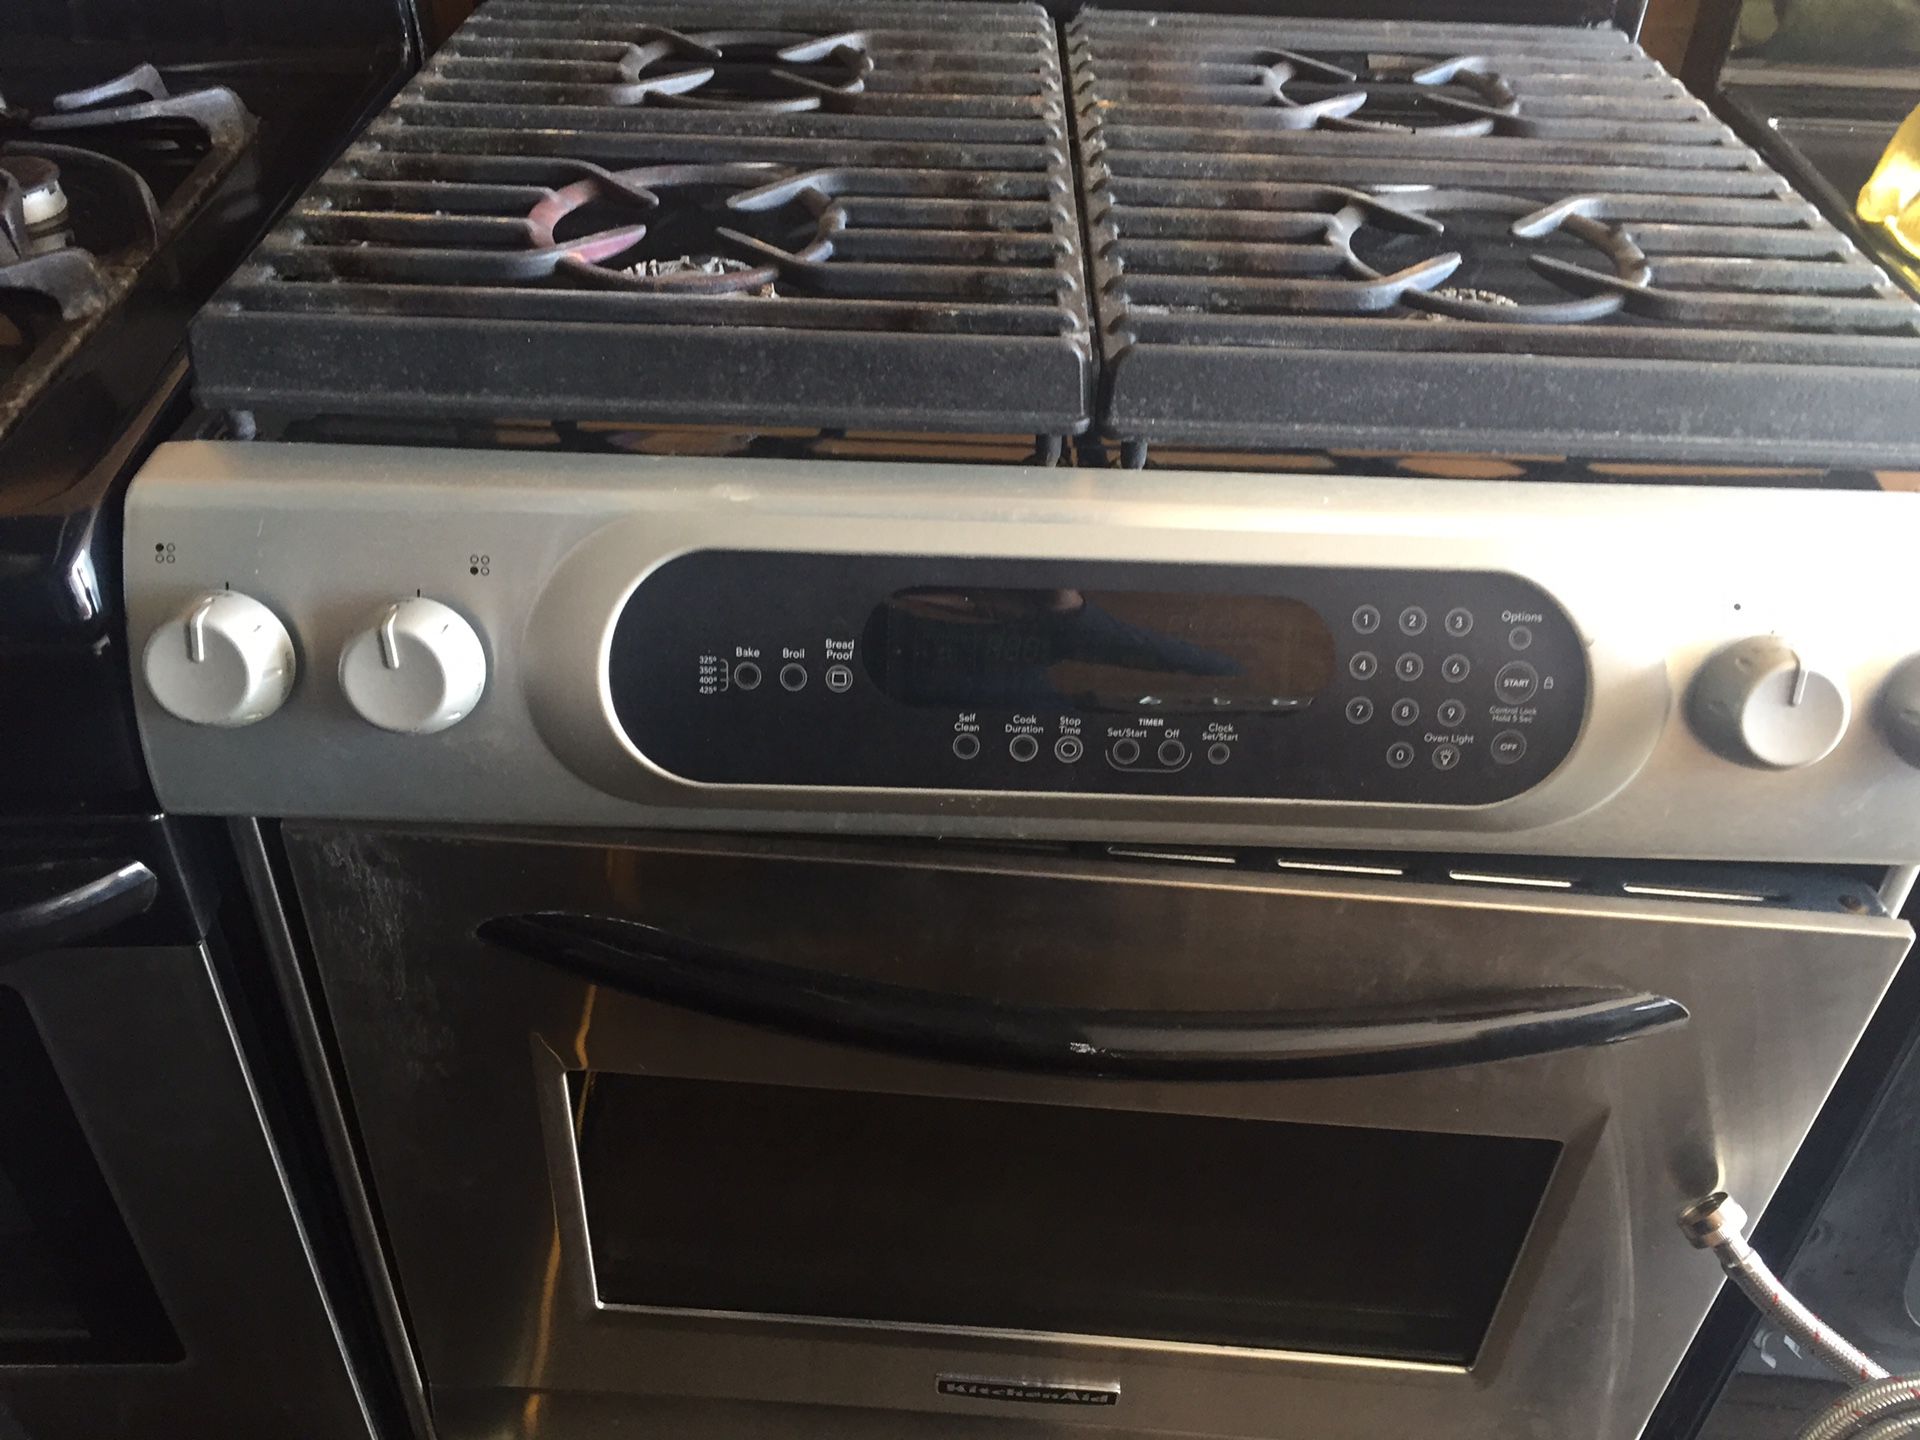 Kitchenaid stainless steel gas stove oven range DISCOUNTED FOR PICKUP!!